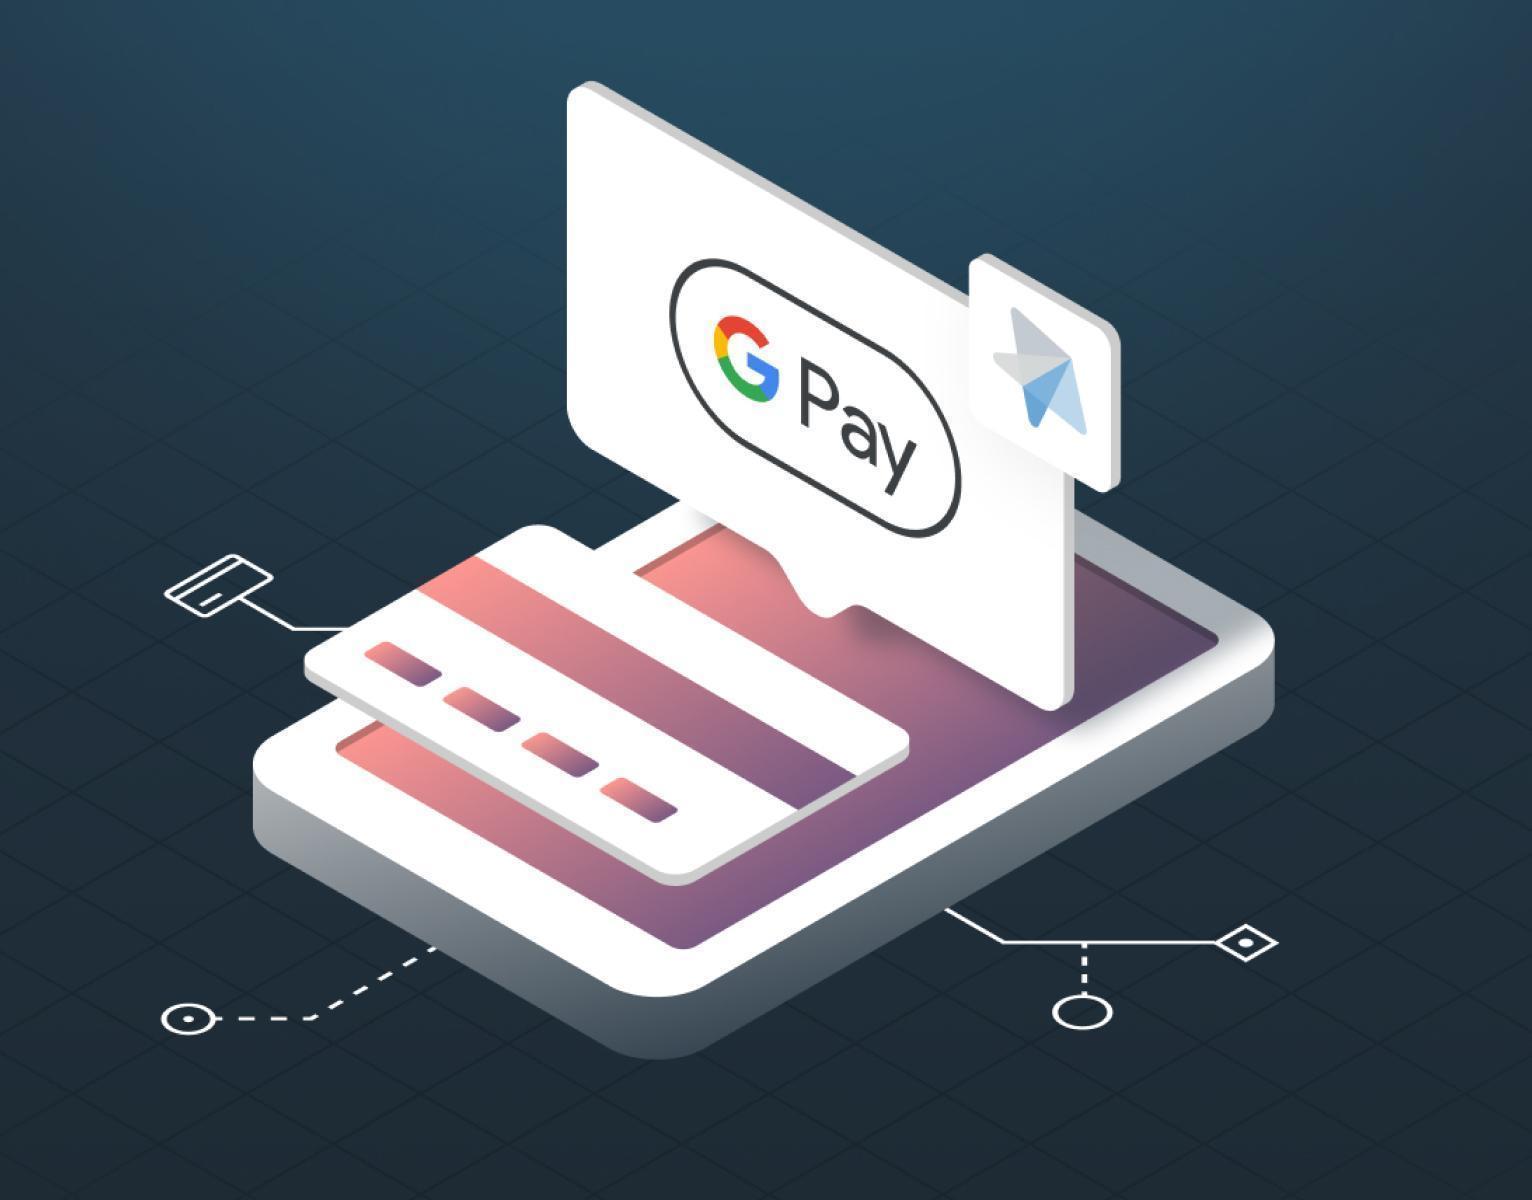 Payneteasy - Google Pay’s Certified Participating Processor